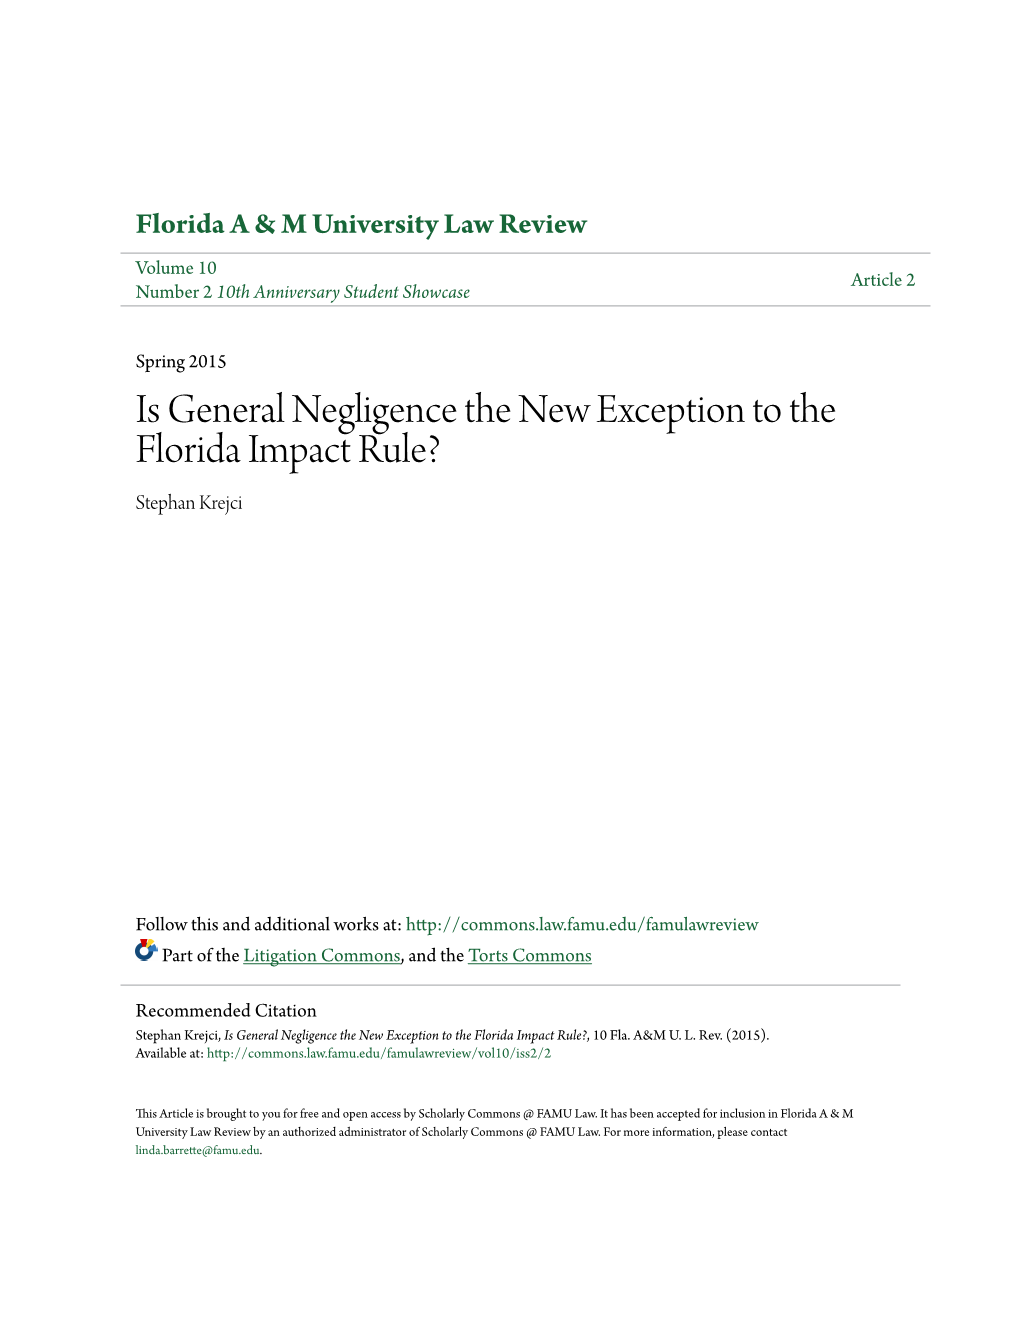 Is General Negligence the New Exception to the Florida Impact Rule? Stephan Krejci